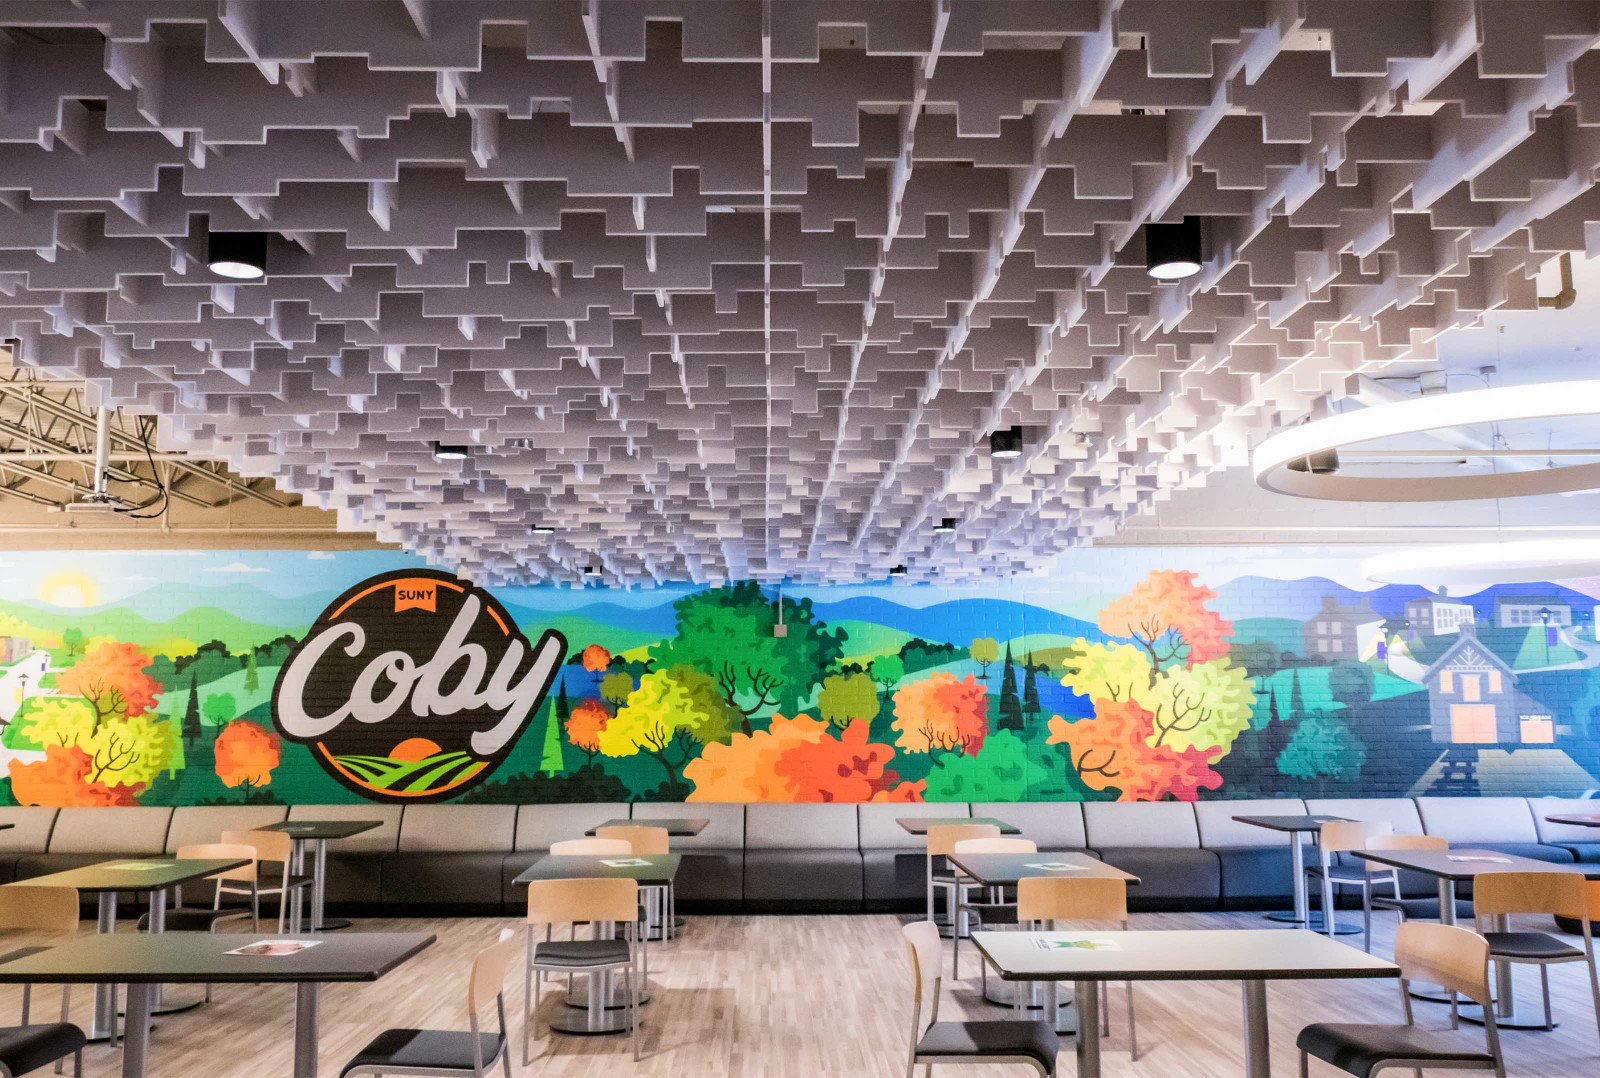 White SkyLine paneling lines the ceiling. There is a colorful mural with Coby’s company logo, trees and houses. A combination of booths and tables with chairs line the floor.